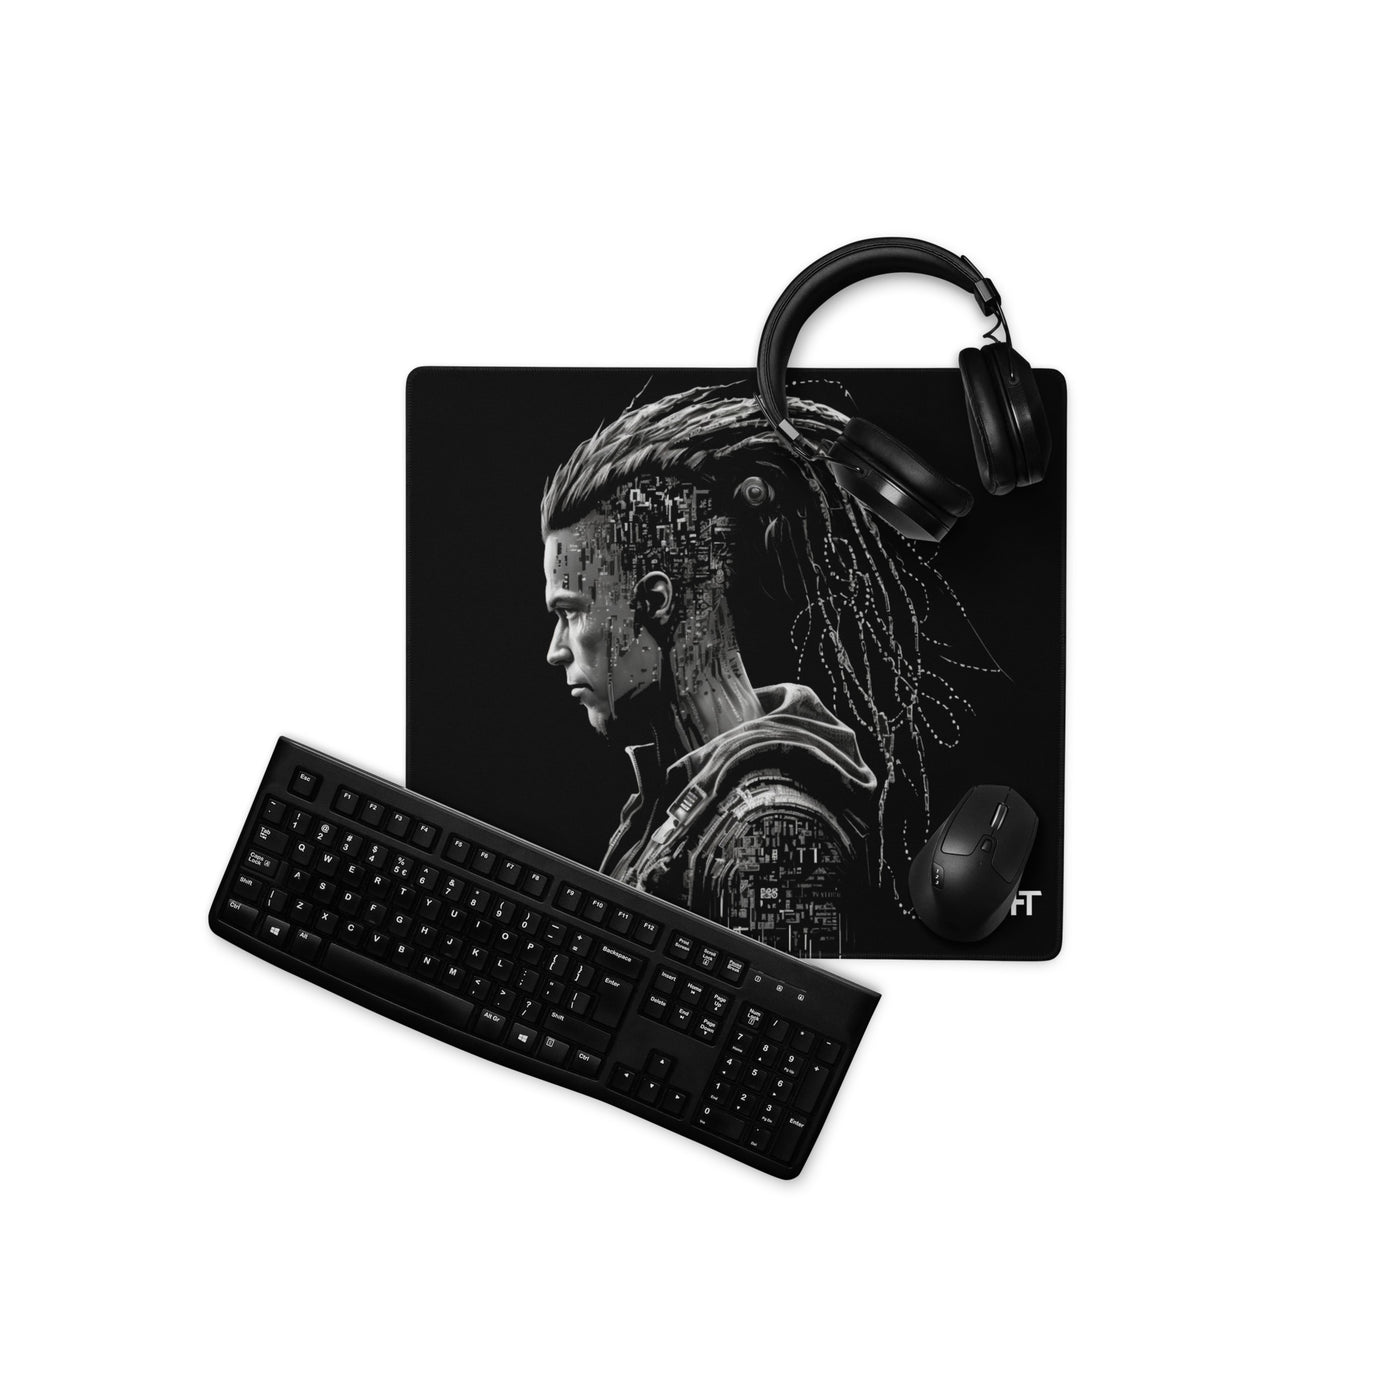 Cyberware assassin v32 - Gaming mouse pad